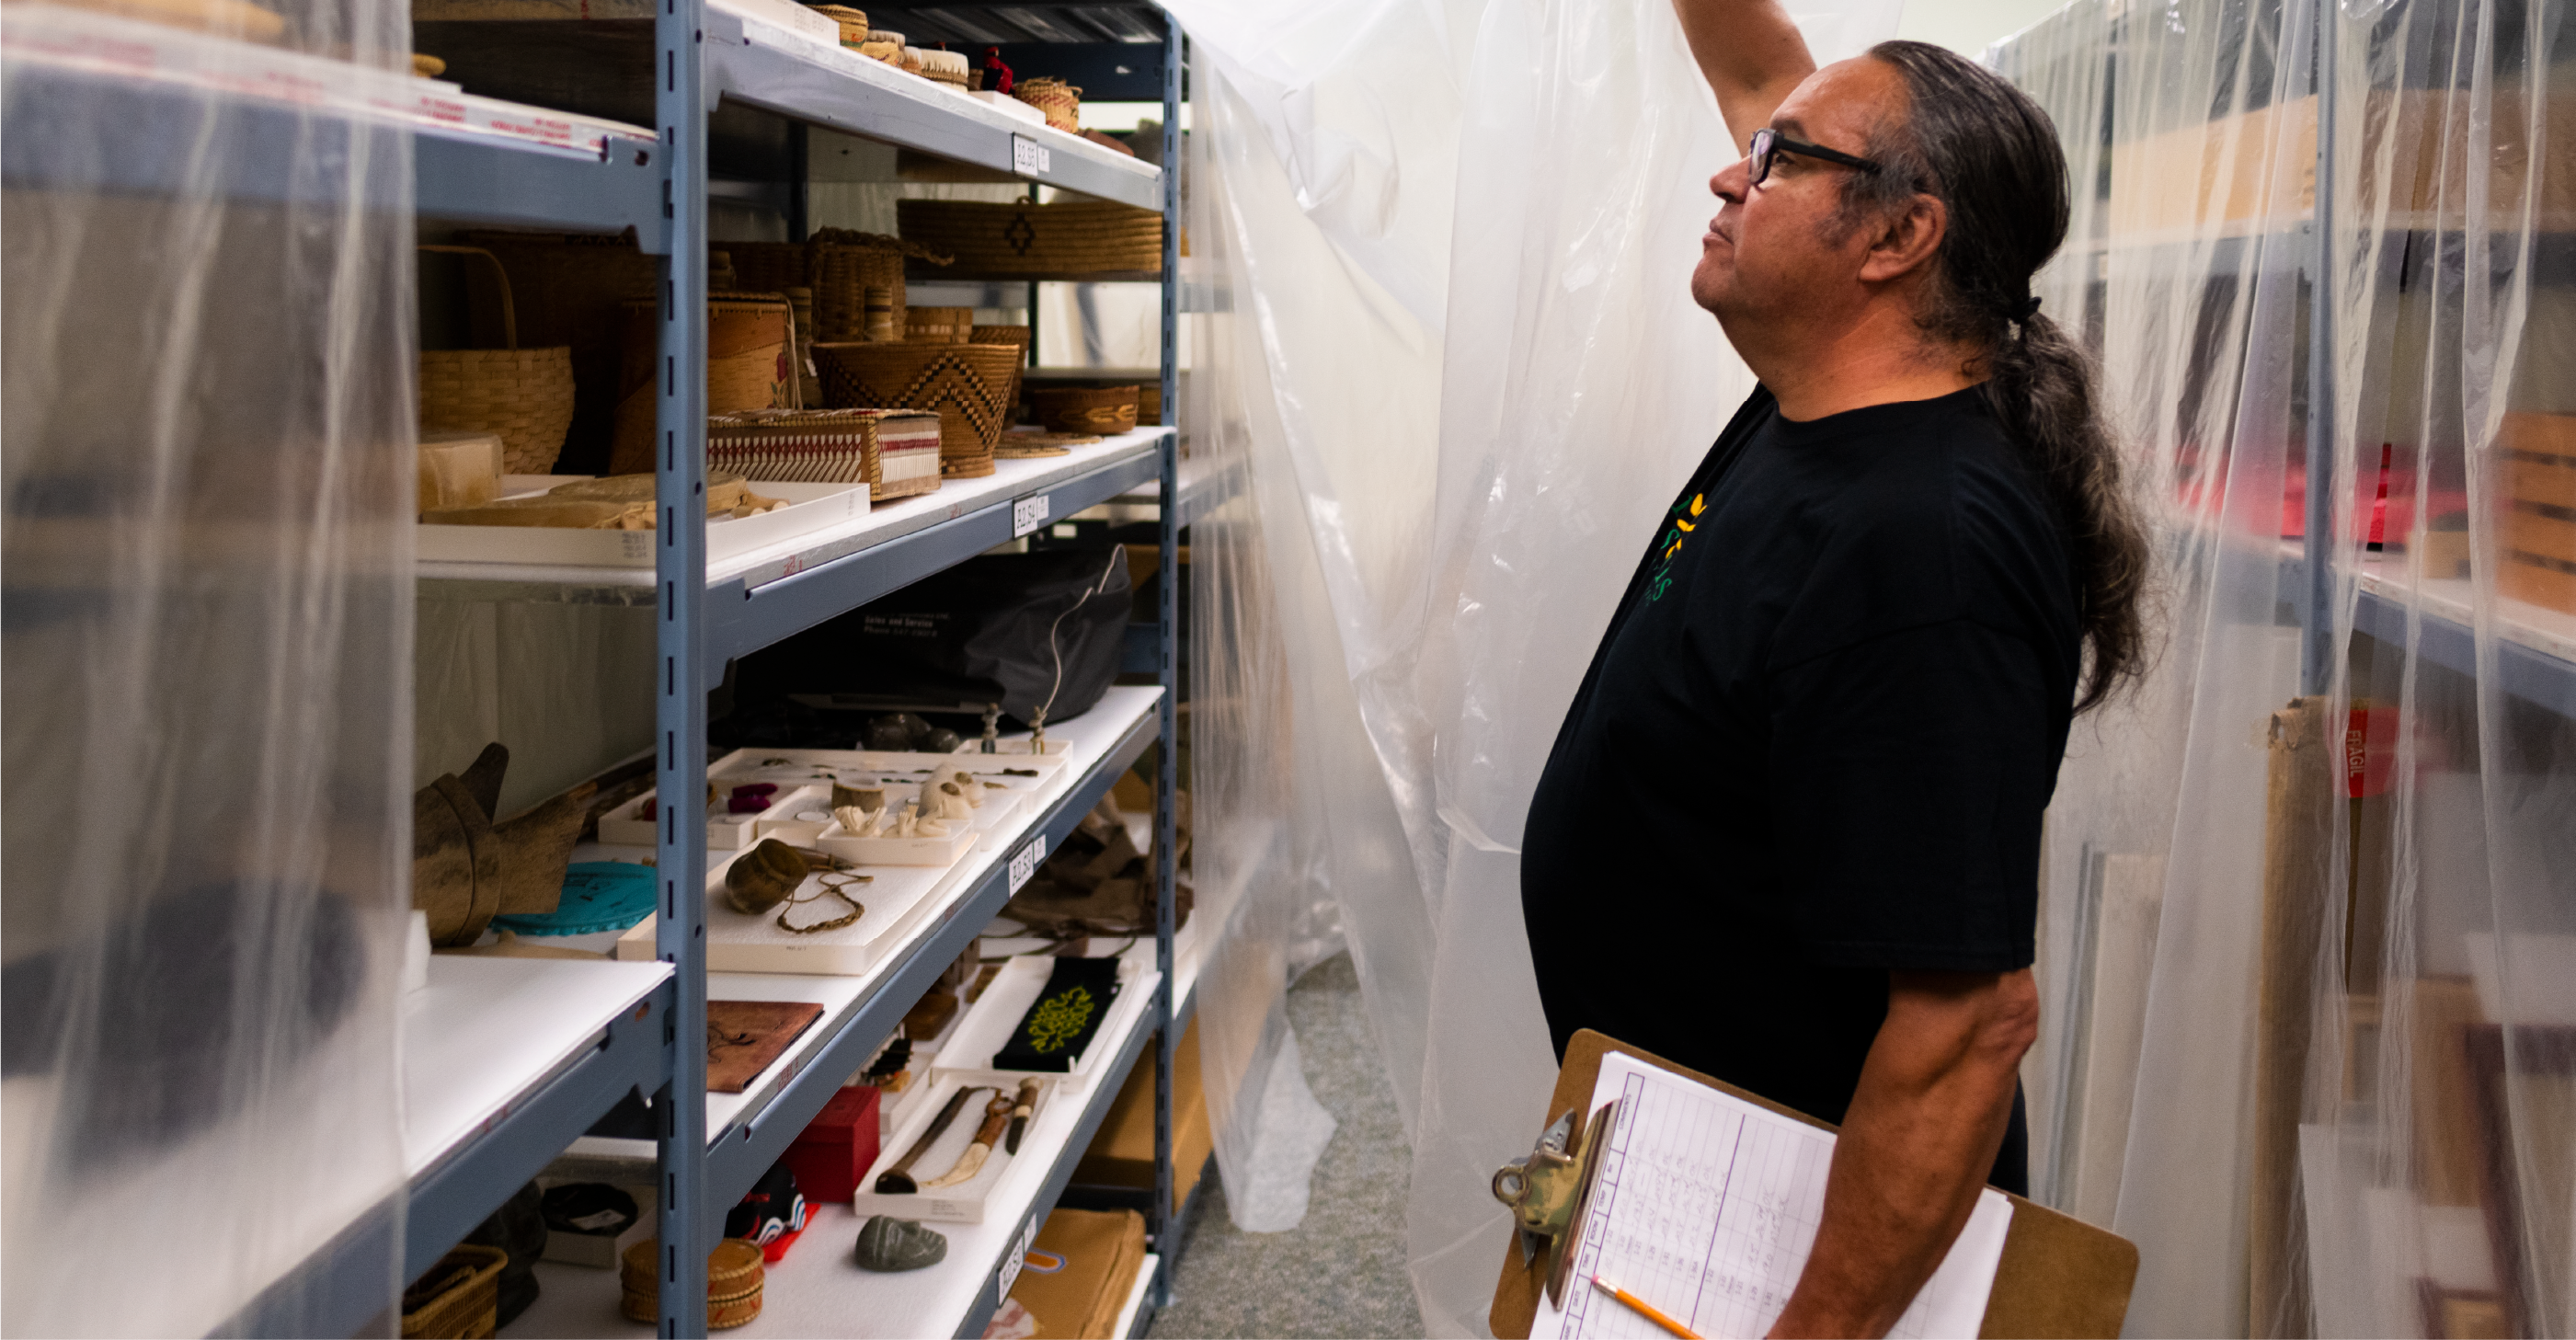 Tom Hunter, a member of Saddle Lake Cree Nation, is a collections assistant at the U of A Museums who helps to preserve art and history as part of his role.